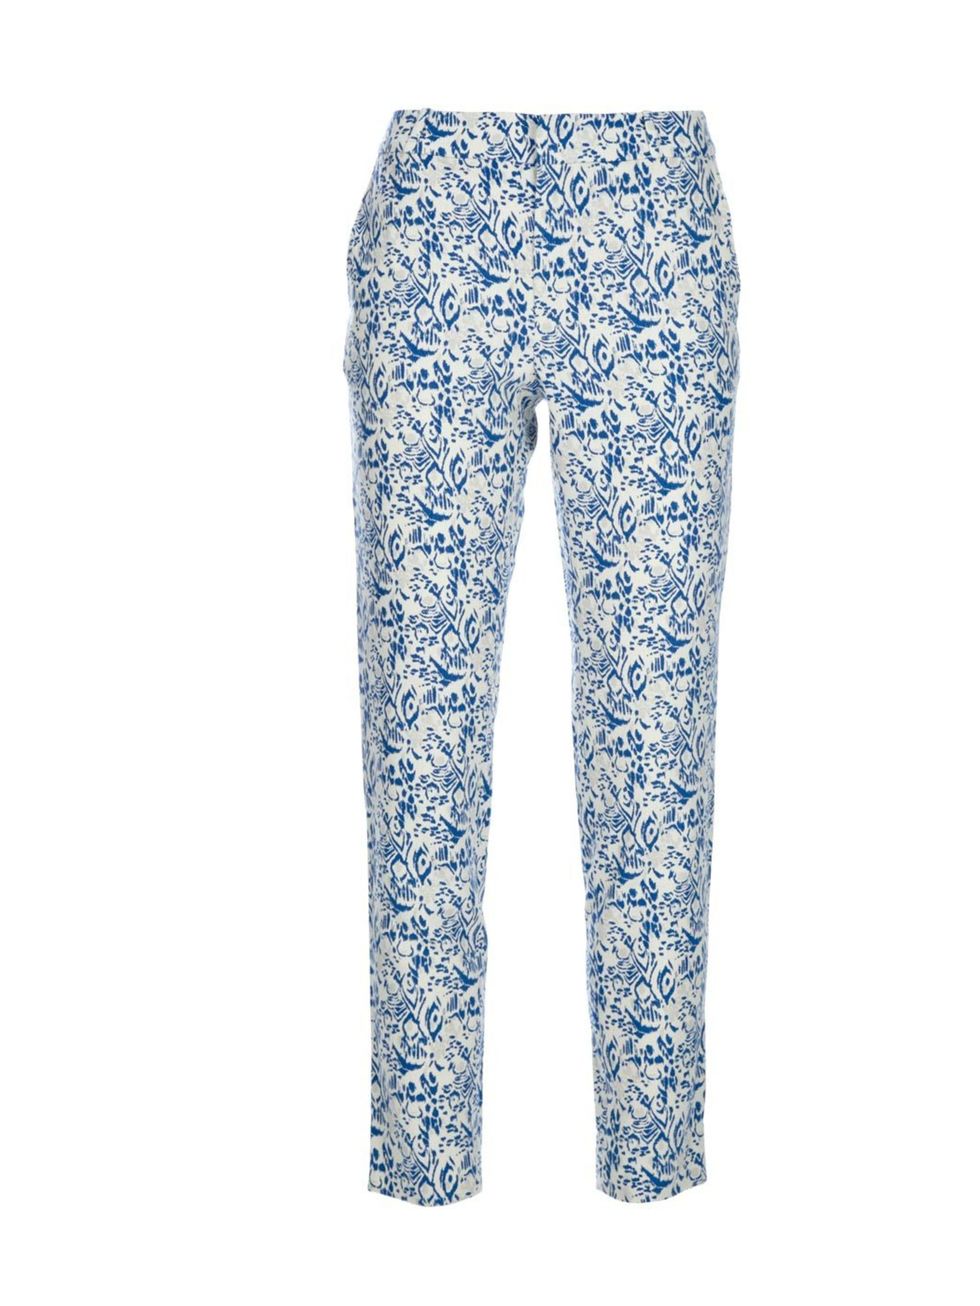 <p>Make a style statement in these perfect-for-spring printed trousers Vanessa Bruno Athe printed silk trousers, £199, at Farfetch</p><p><a href="http://shopping.elleuk.com/browse?fts=vanessa+bruno+athe+cropped+silk+trouser+farfetch">BUY NOW</a></p>